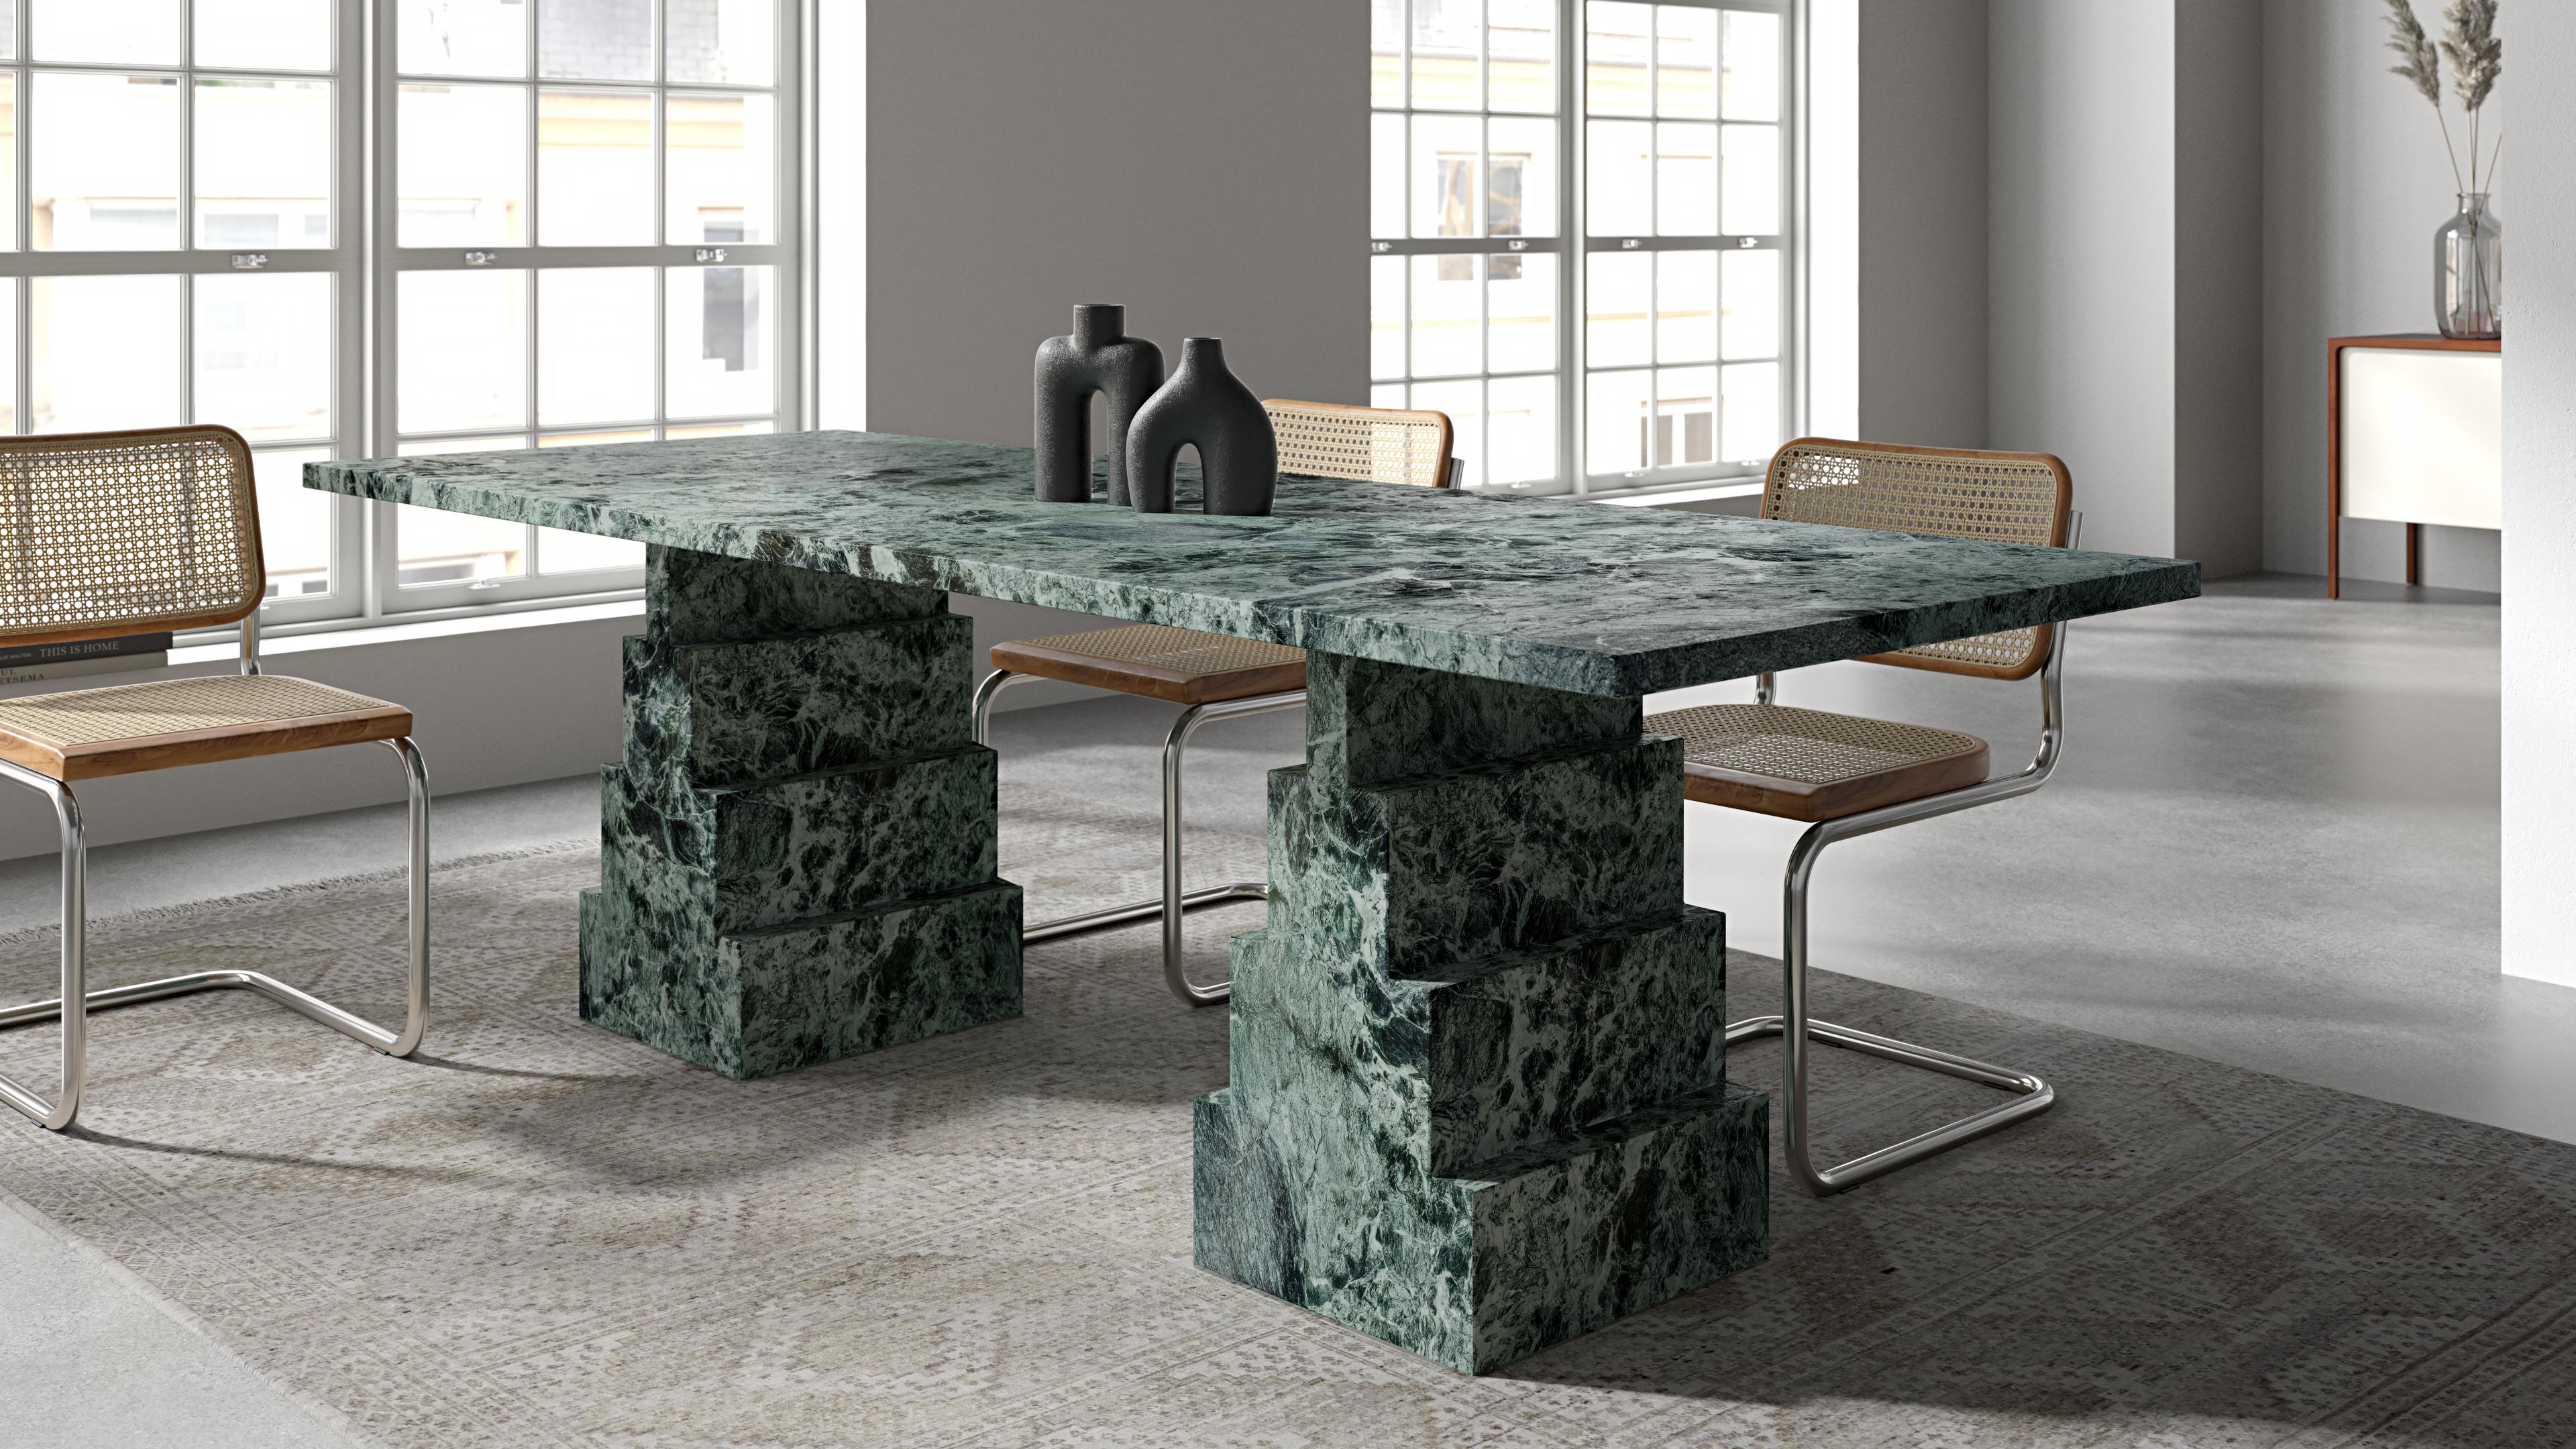 Chinese NORDST NIKO Dining Table, Italian Green Marble, Danish Modern Design, New For Sale